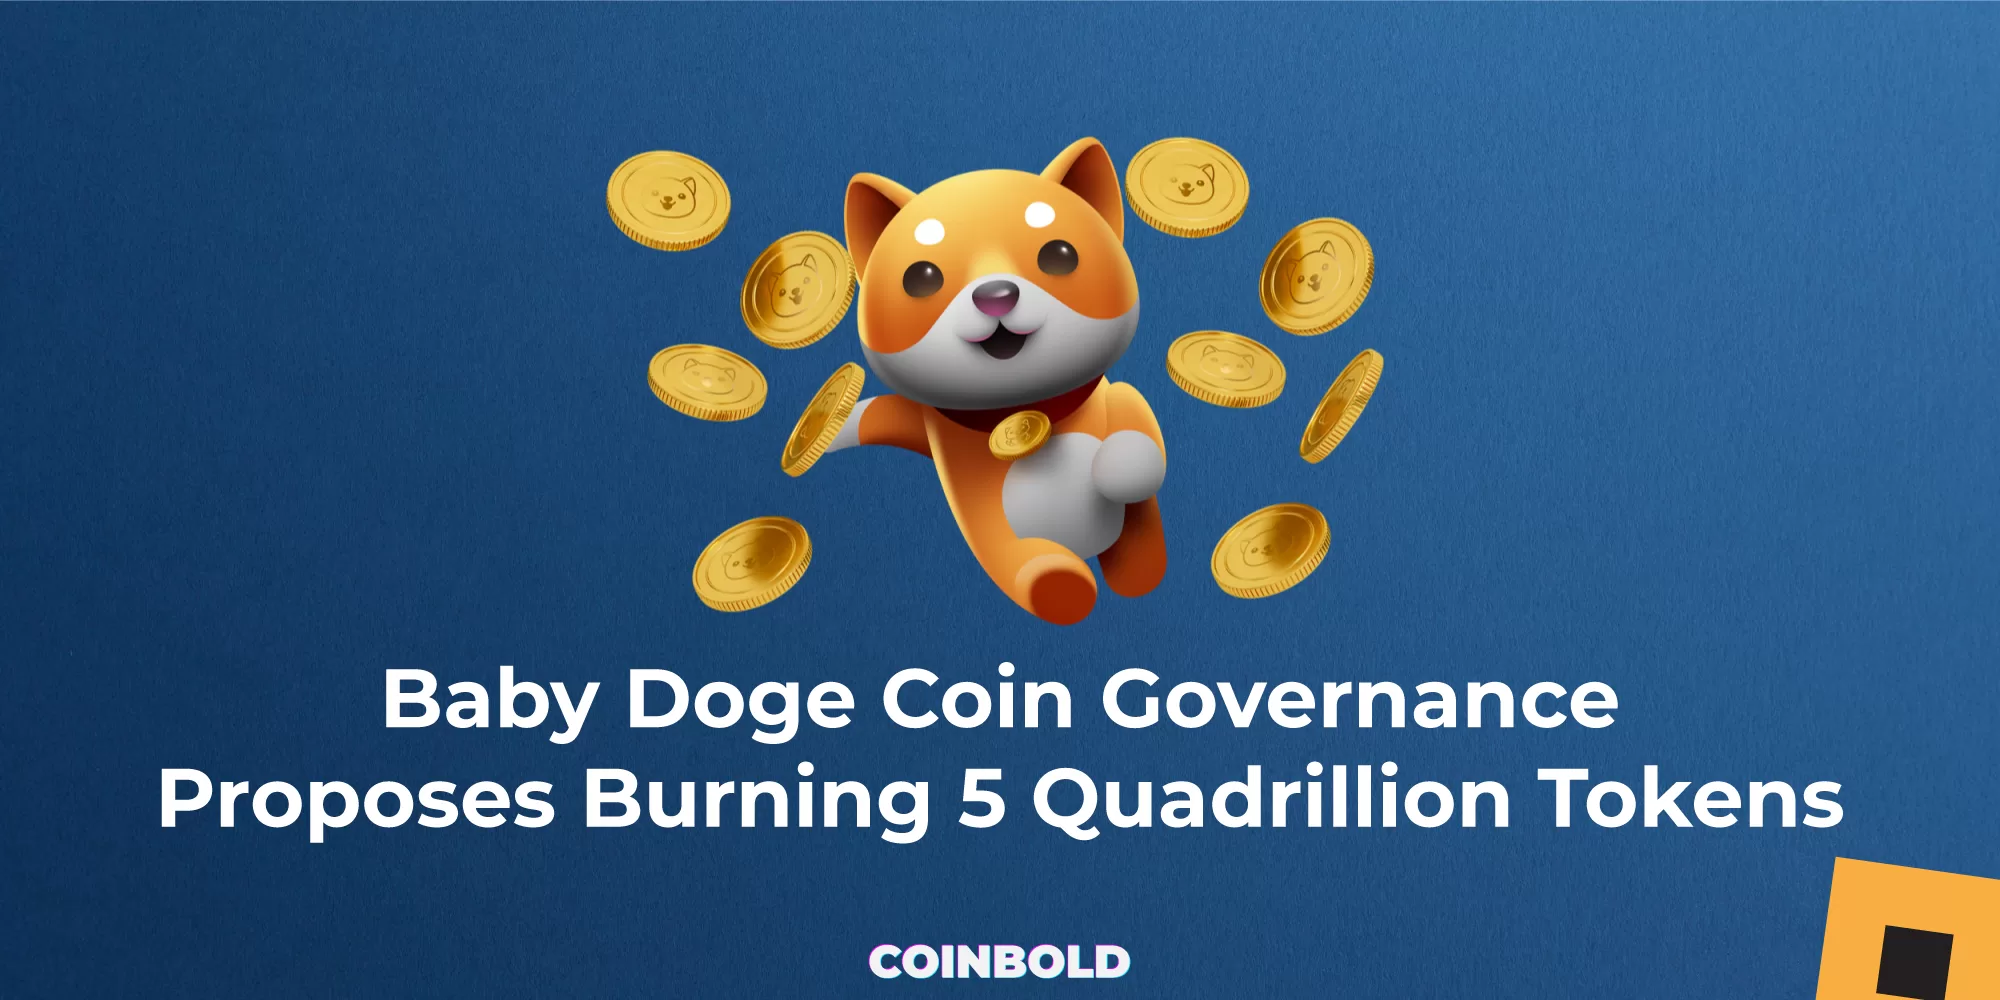 Baby Doge Coin Governance Proposes Burning 5 Quadrillion Tokens